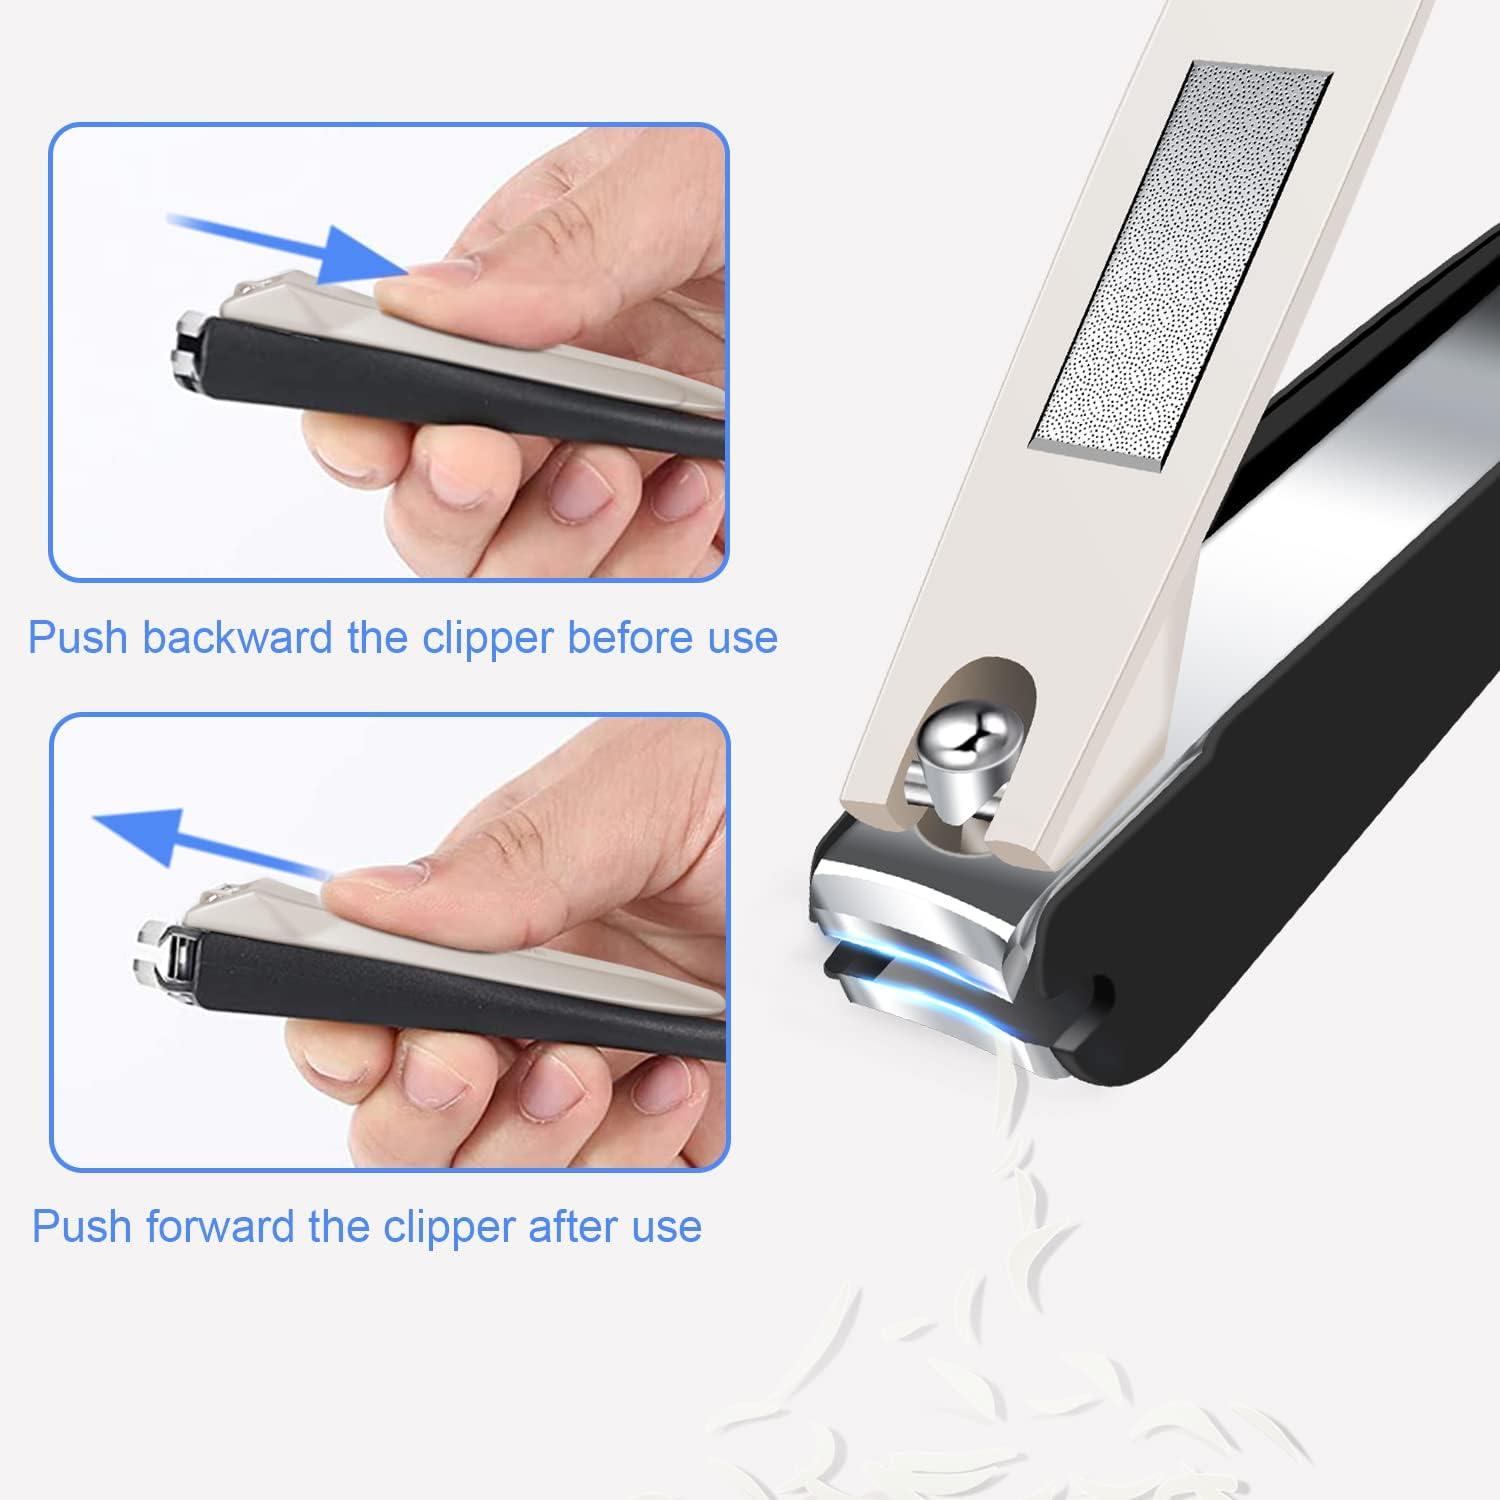 DRMODE Toenail Clippers for Thick Nails - Professional Toe Nail Clippers  for Thick Toenails Sharp Curved Blade Mess Free Nail Clippers